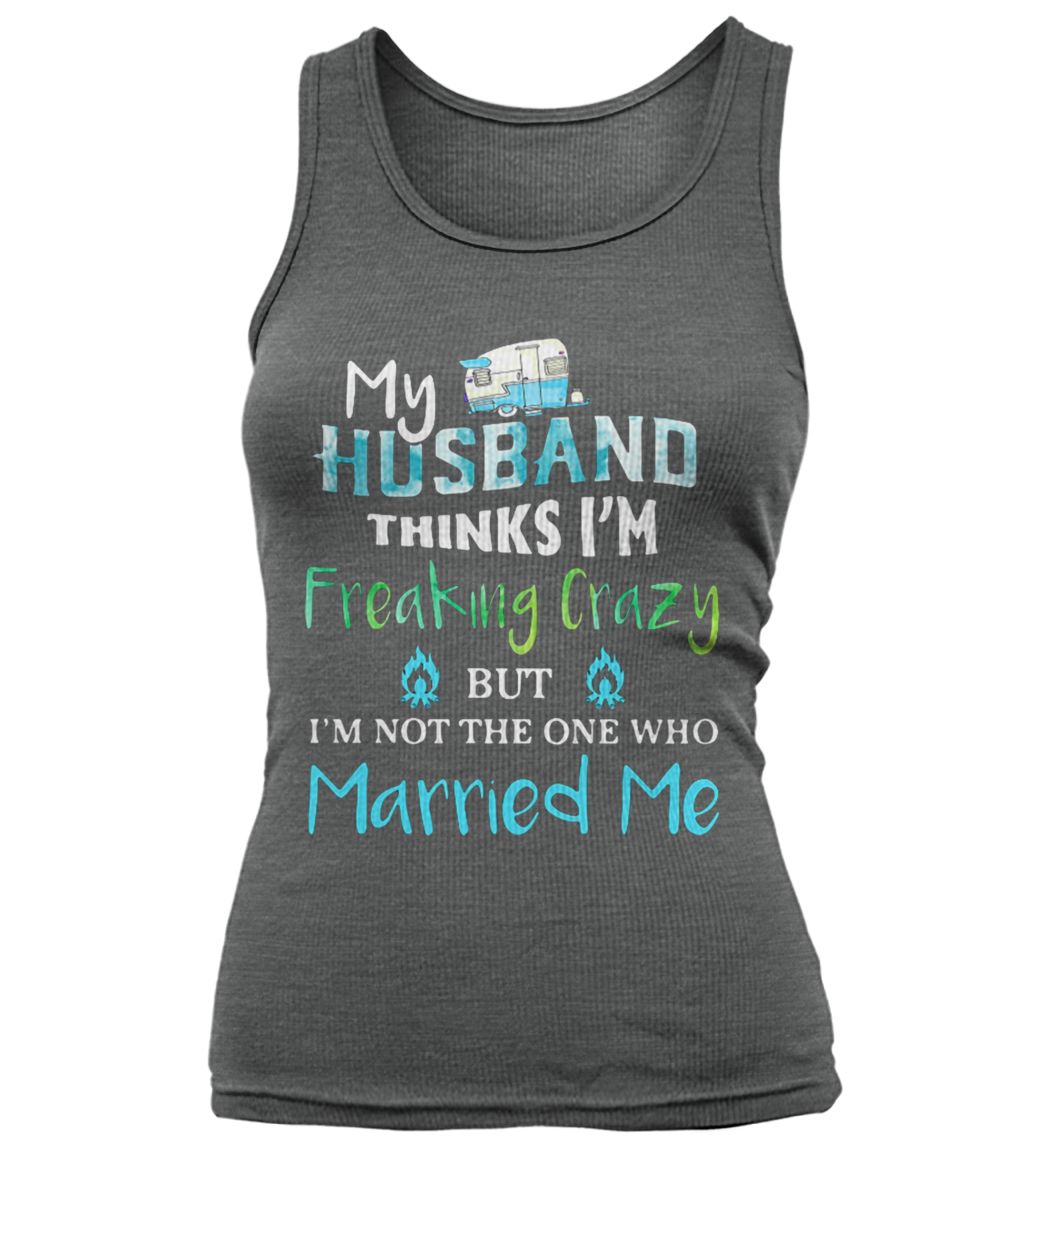 Camping my husband thinks I'm crazy but I'm not the one who married me women's tank top